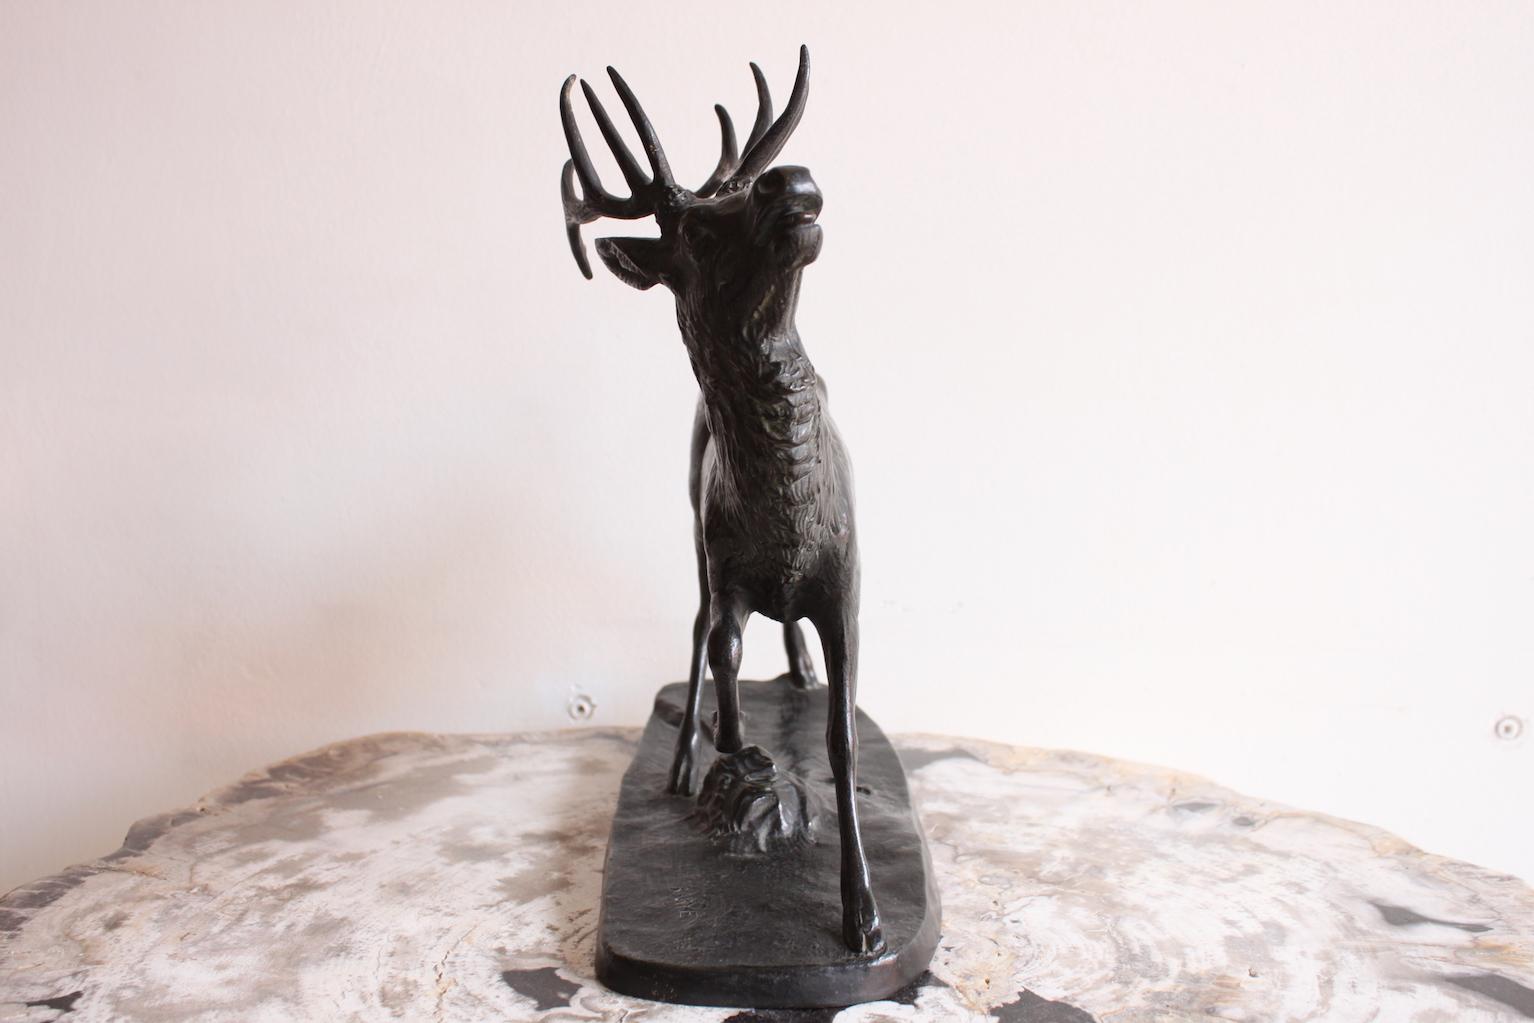 A bronze sculpture of a deer by Antoine Louis Barye, 1850.
Signed and stamped 